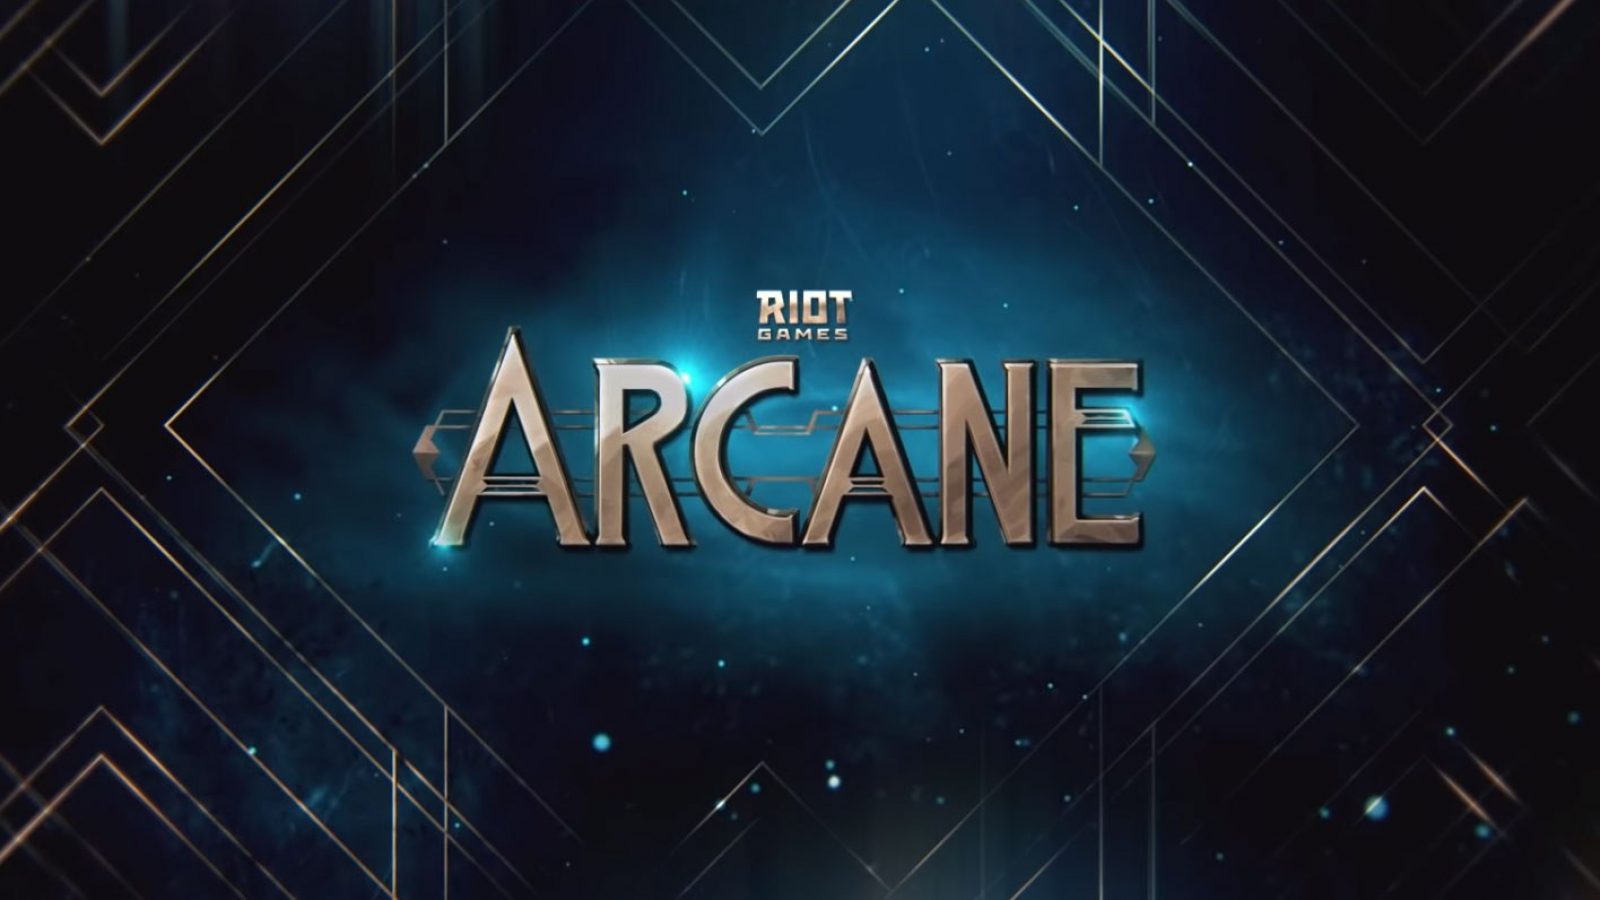 Oil and Water (Arcane: S01E08). League of Legends